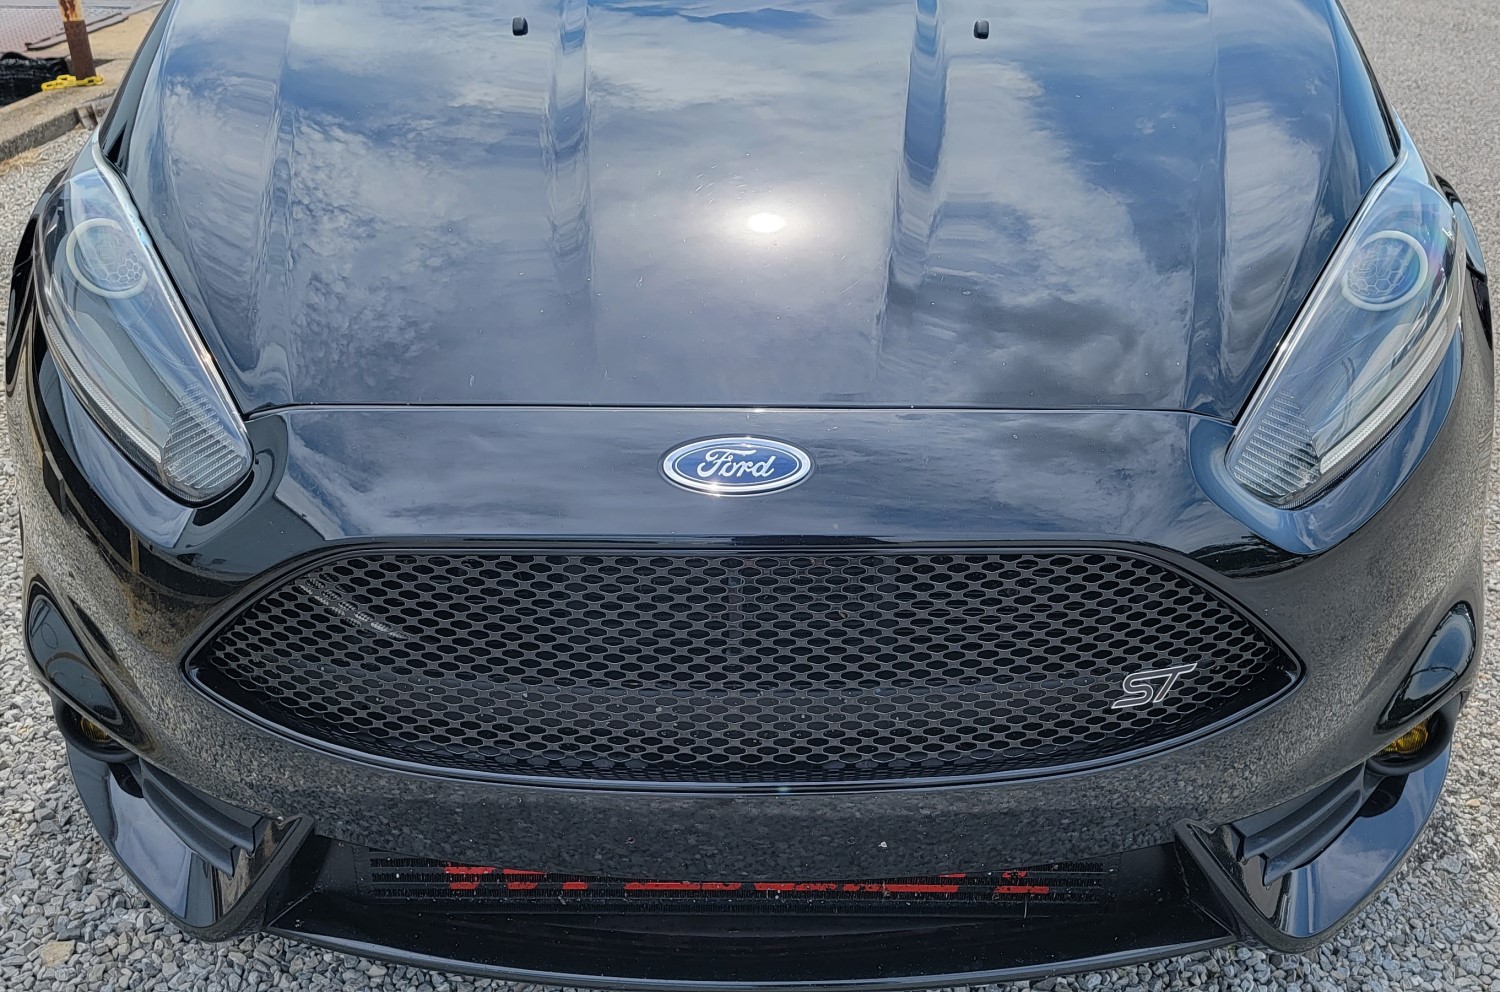 Revamped Style on Ford Fiesta ST with New Mesh Grille for Maximum Airflow and Cooling